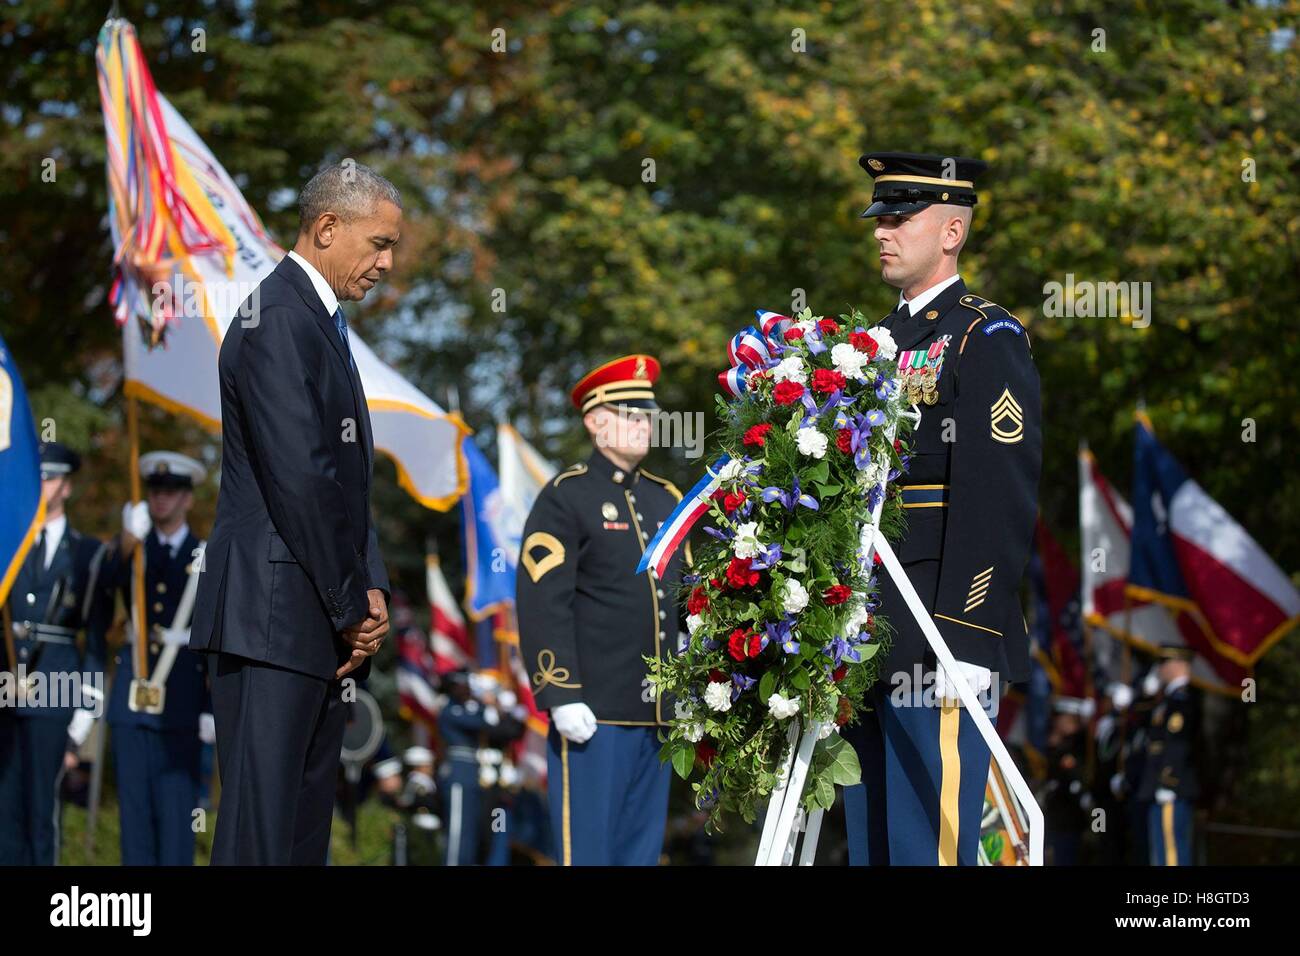 U.S. President Barack Obama with Major General Bradley A. Becker, Commanding General U.S. Army Military District of Washington, places a wreath at the Tomb of the Unknown Soldier in Arlington National Cemetery November 11, 2016 in Arlington, Virginia. Stock Photo